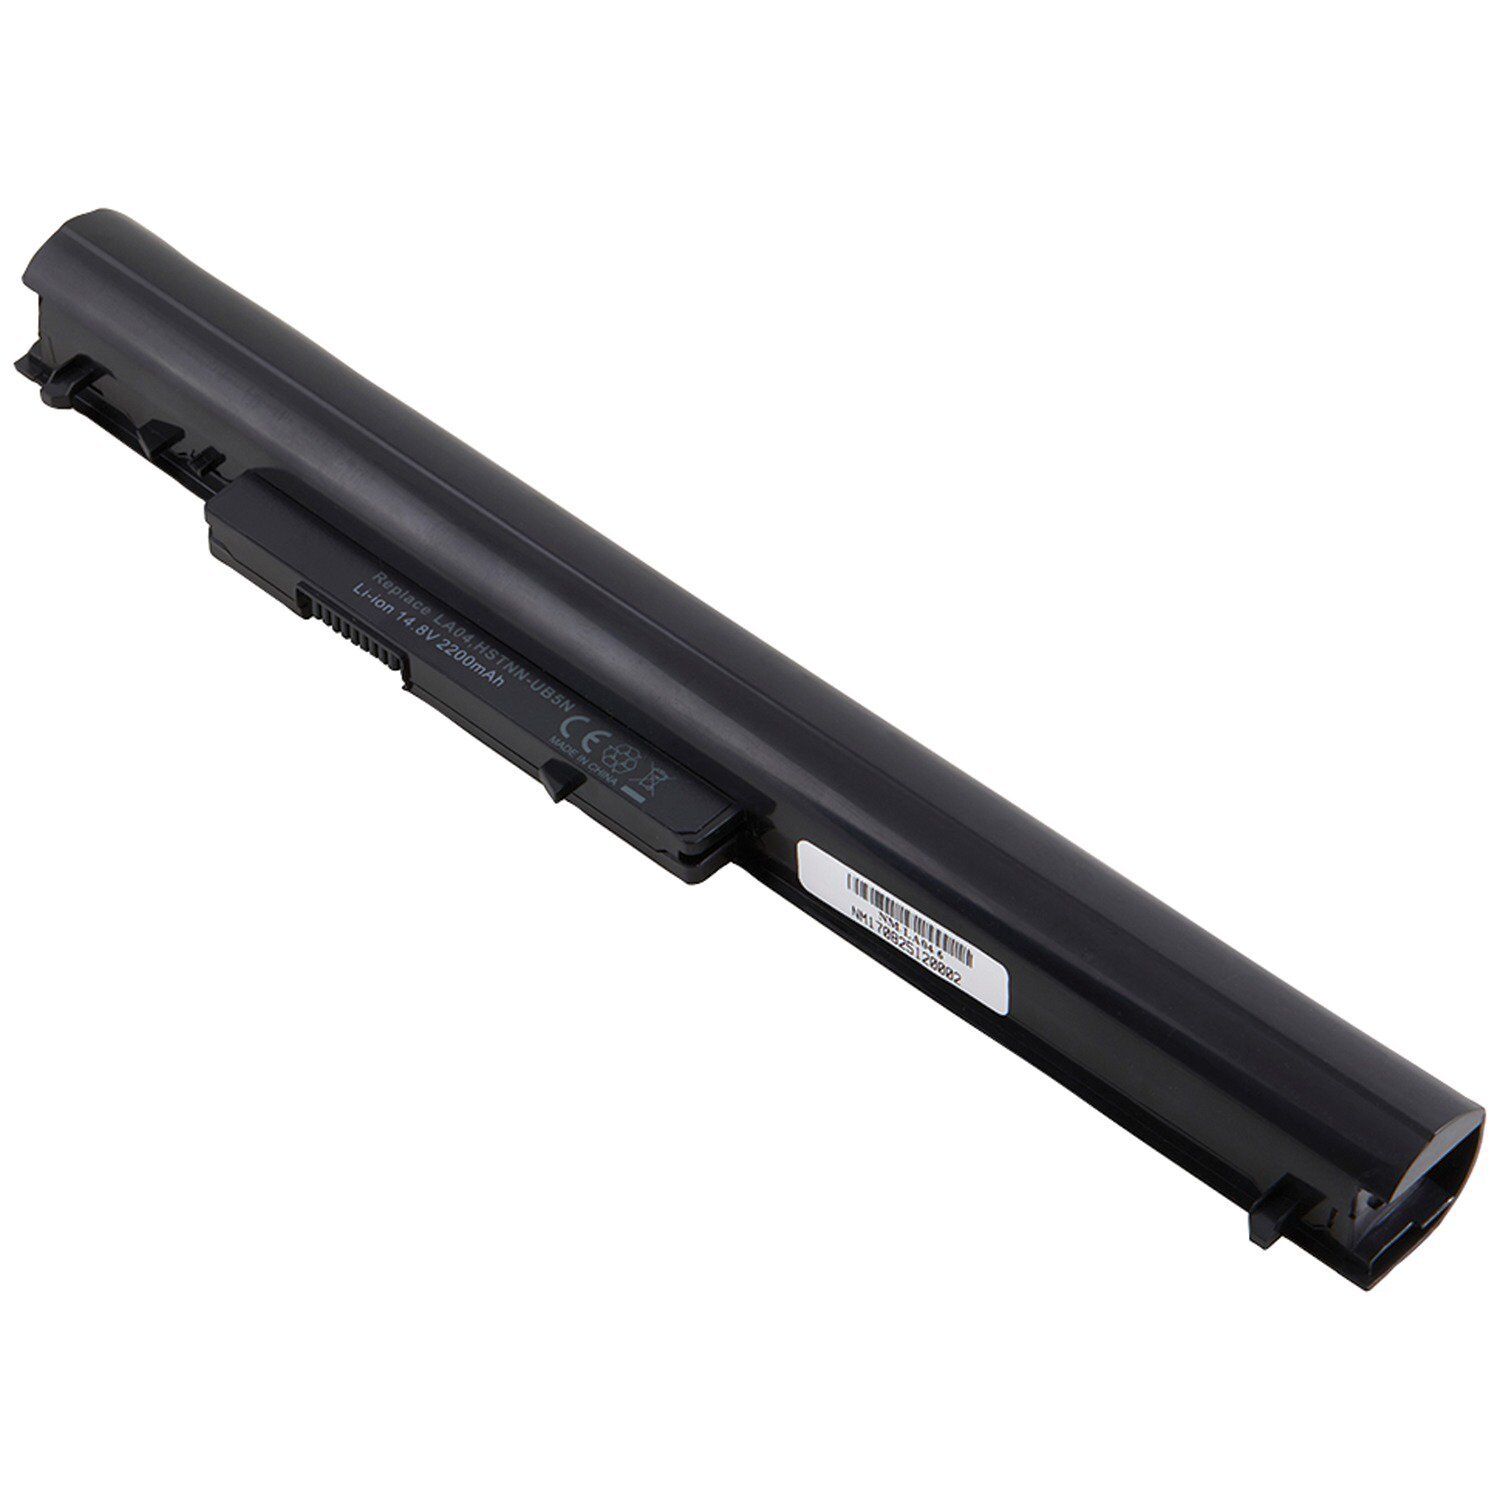 DENAQ 4-Cell Lithium-Ion Battery for HP 248 G1 340 350 Pavilion 14 15 touchsmart